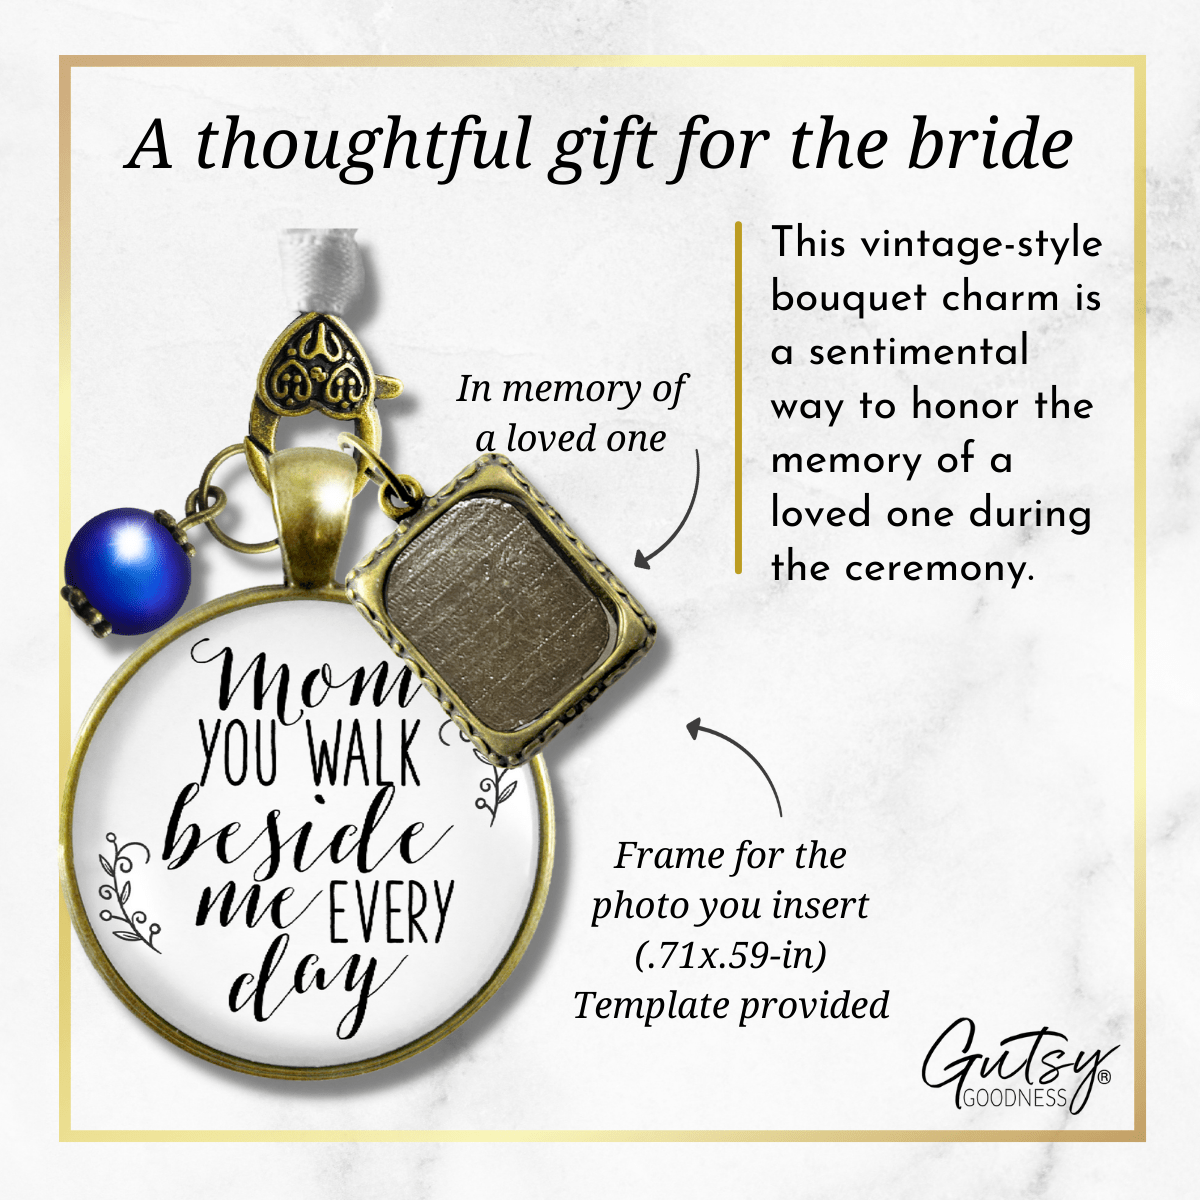 Wedding Bouquet Photo Charm Mom Beside Me White Bride Mother Memory Jewelry Blue Bead - Gutsy Goodness Handmade Jewelry Gifts